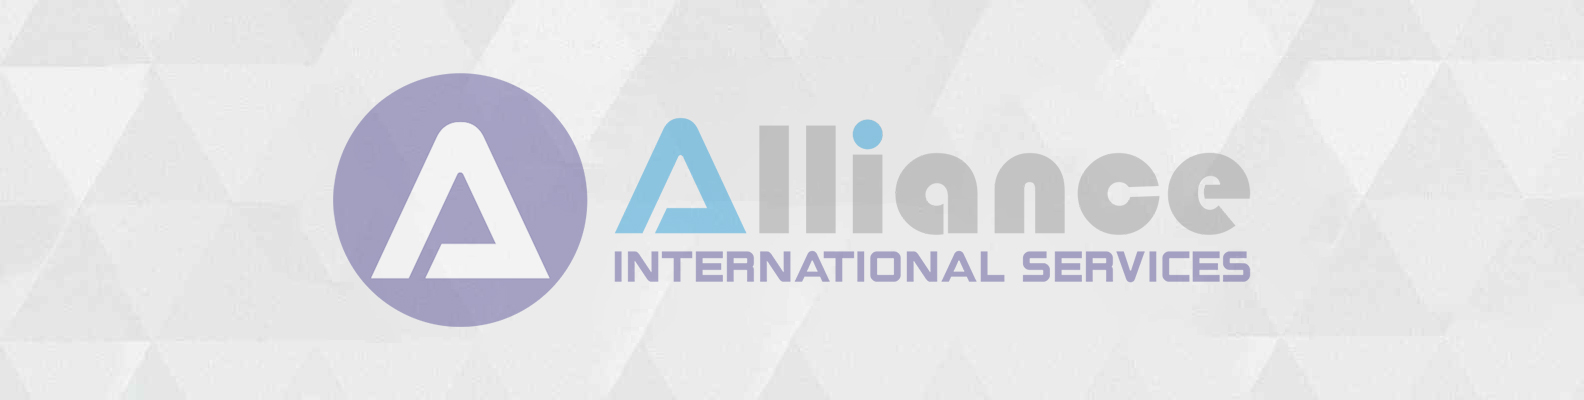 Alliance International Services Unveils Its New Face In Australia